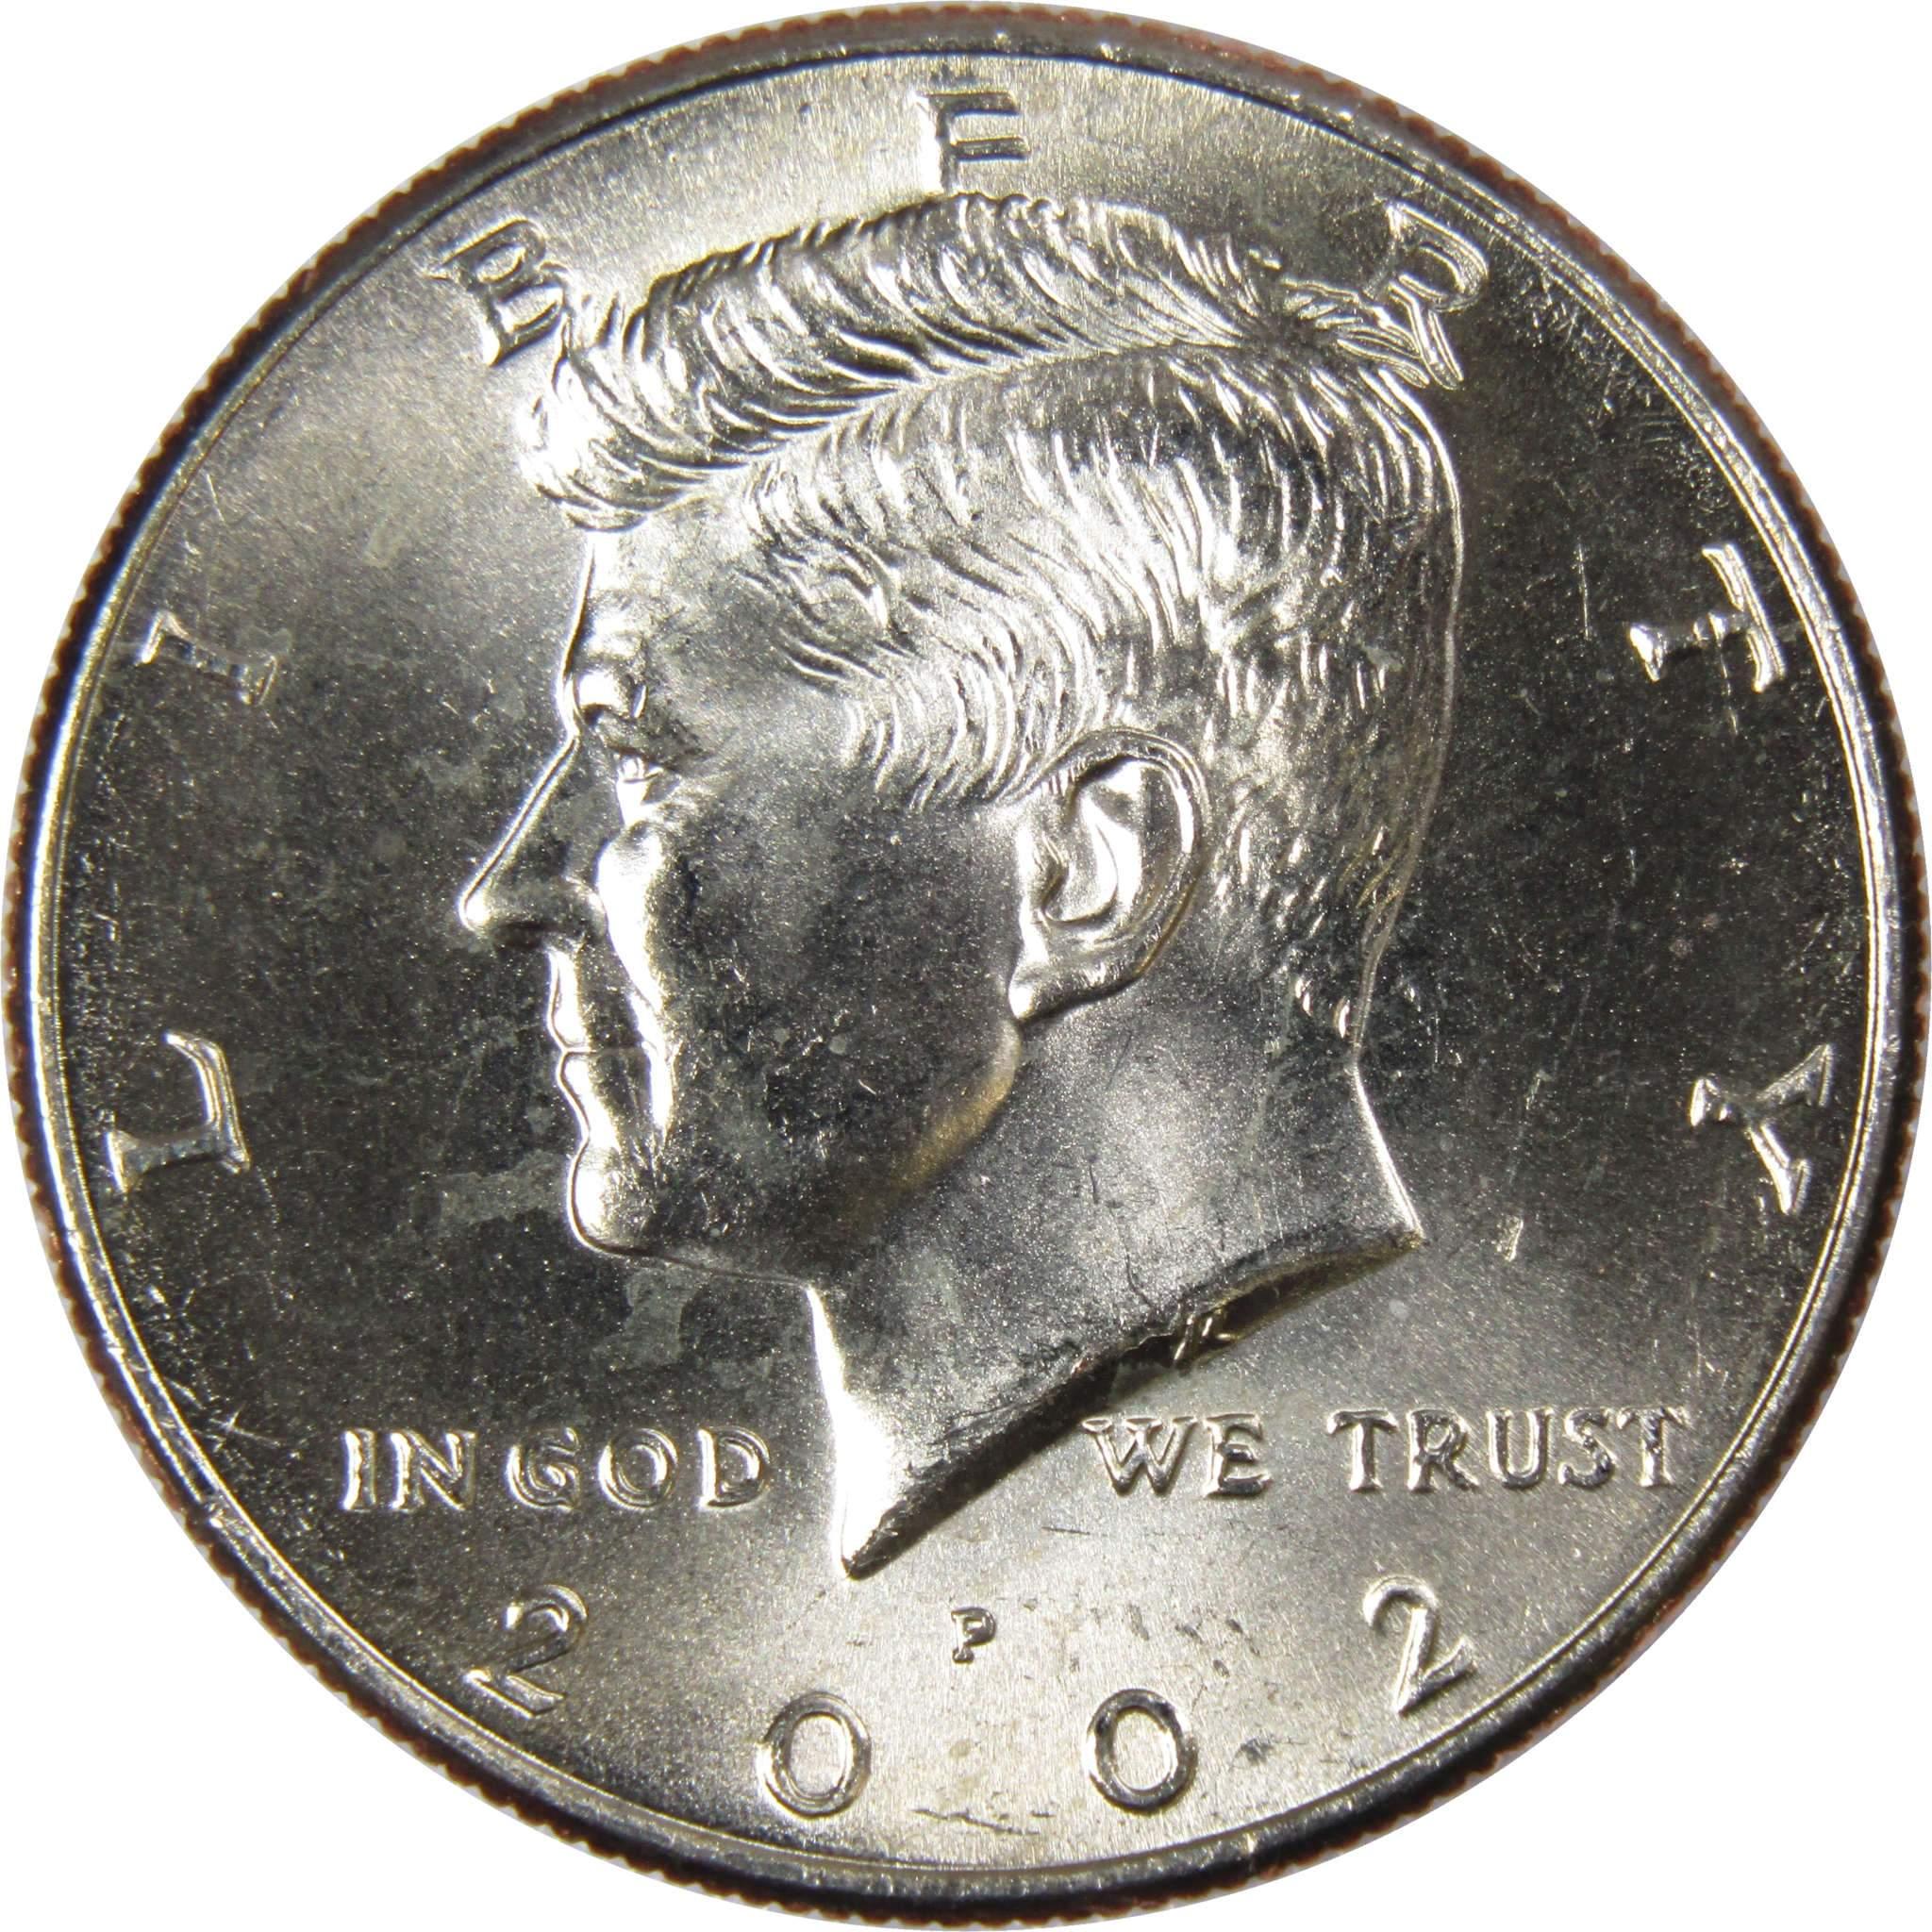 2002 P Kennedy Half Dollar BU Uncirculated Mint State 50c US Coin Collectible